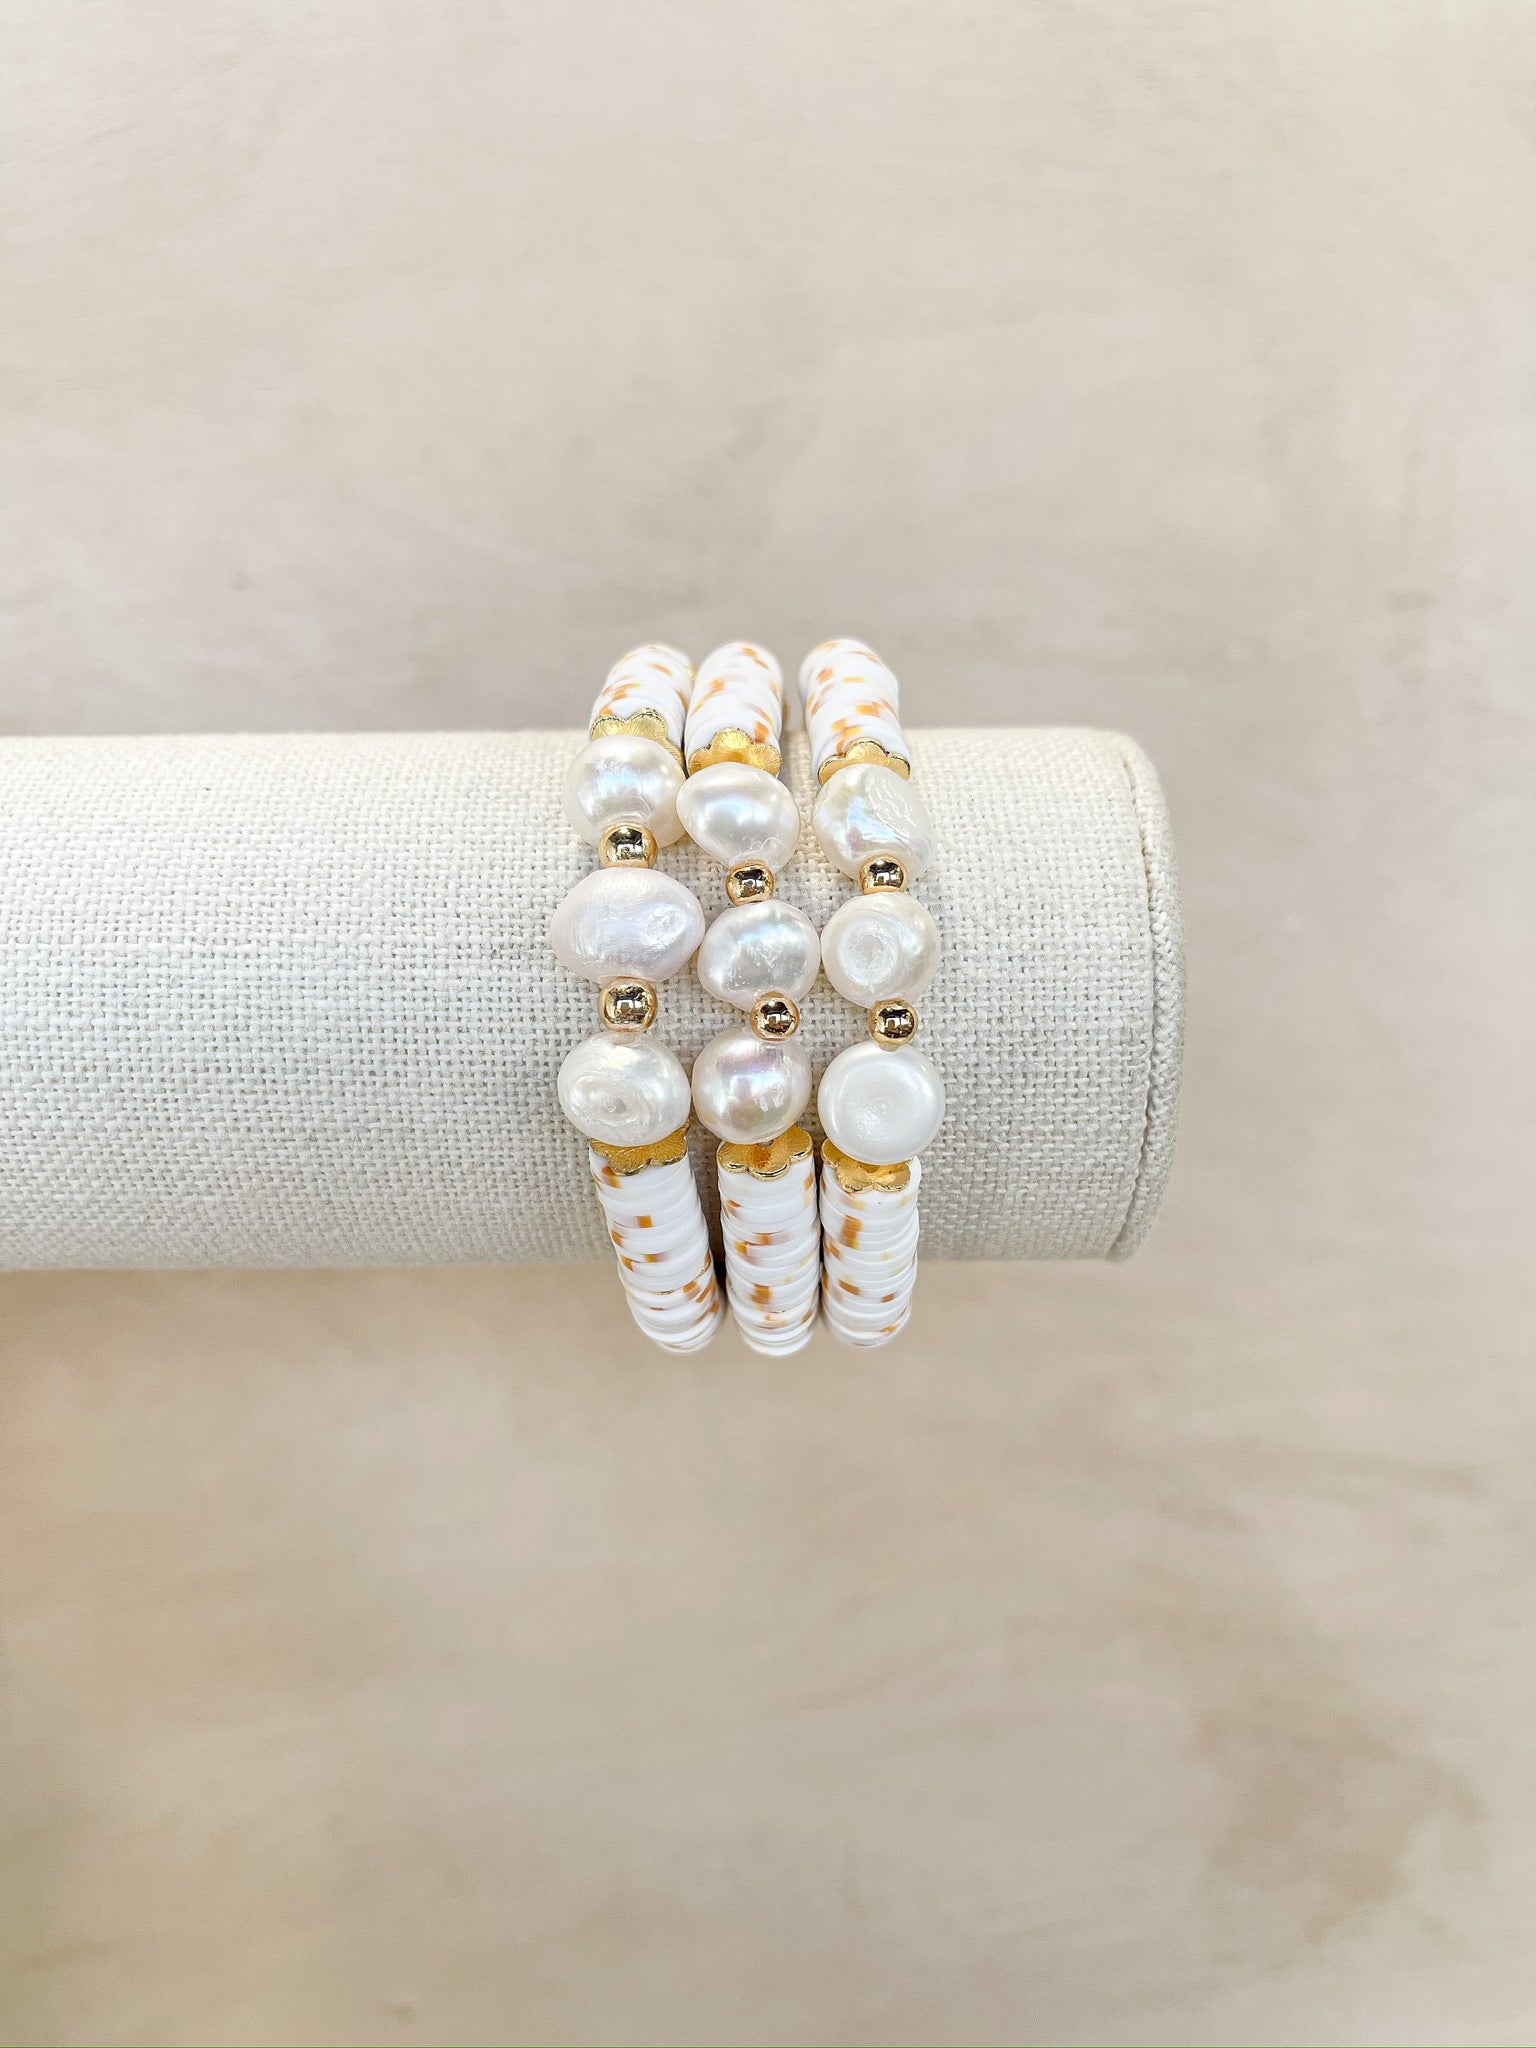 white and camel speckled, three pearl beads separated with gold beads, handmade